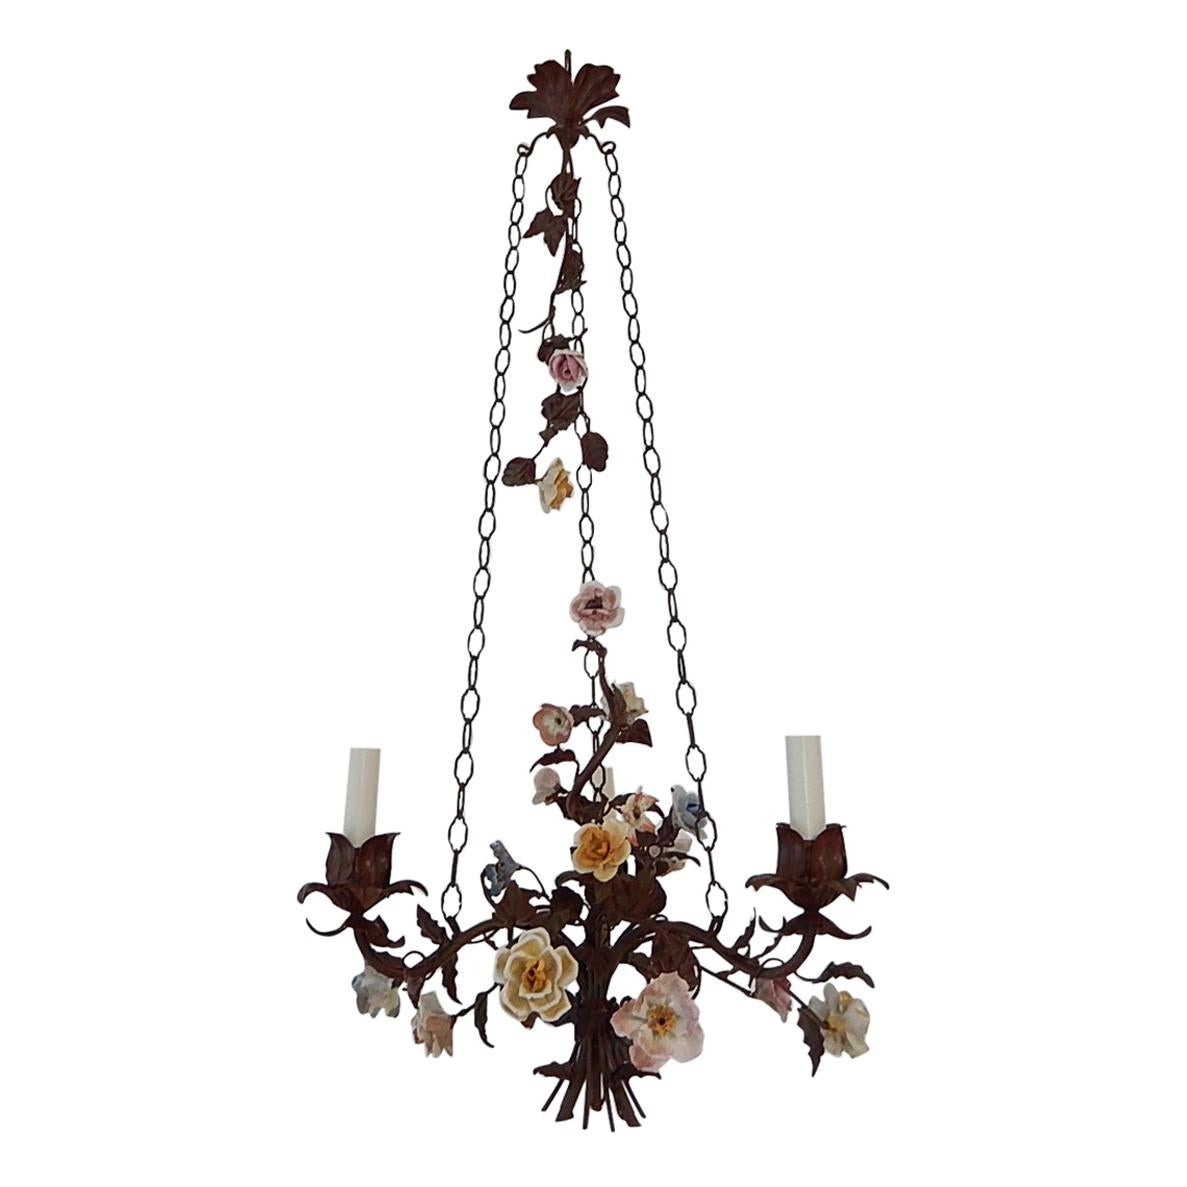  Italian 1870 Tole Polychrome  Porcelain Flowers with Chain Chandelier